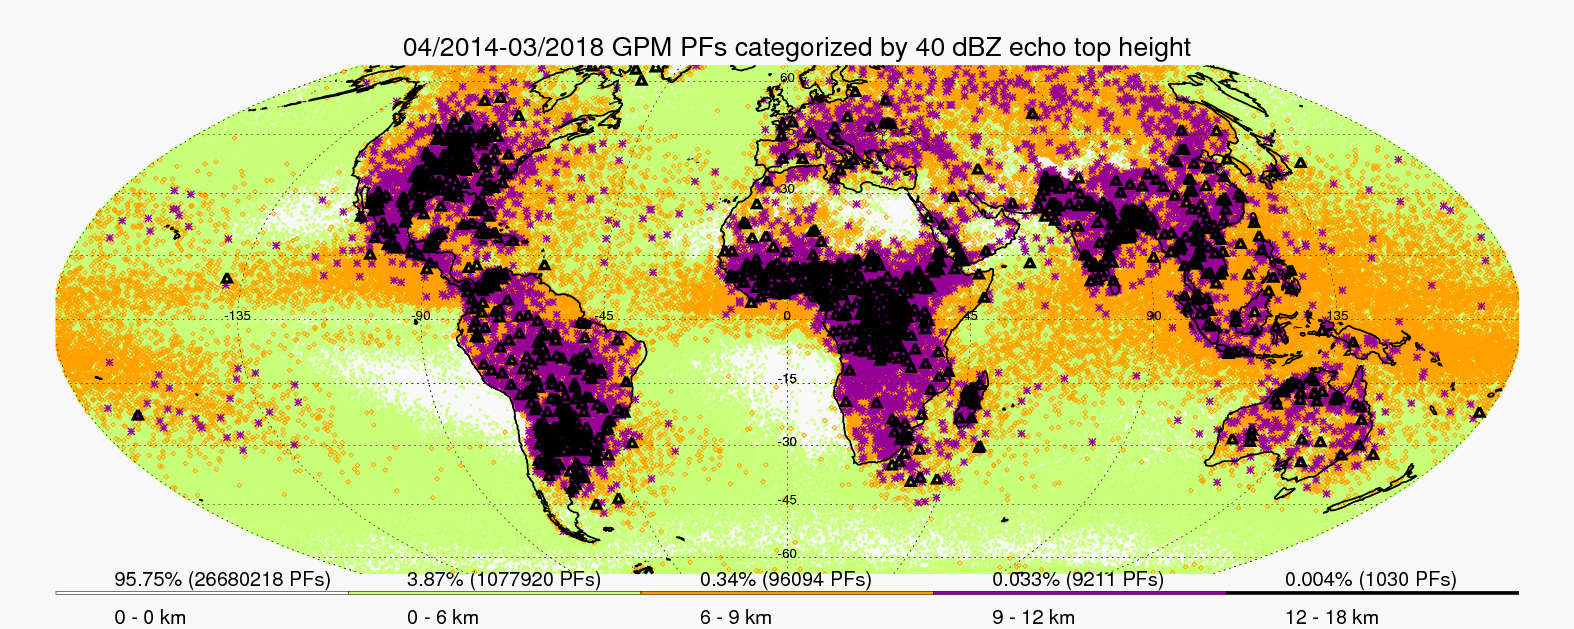  Global distribution of the maximum height of 40 dBZ radar echoes observed within precipitation features